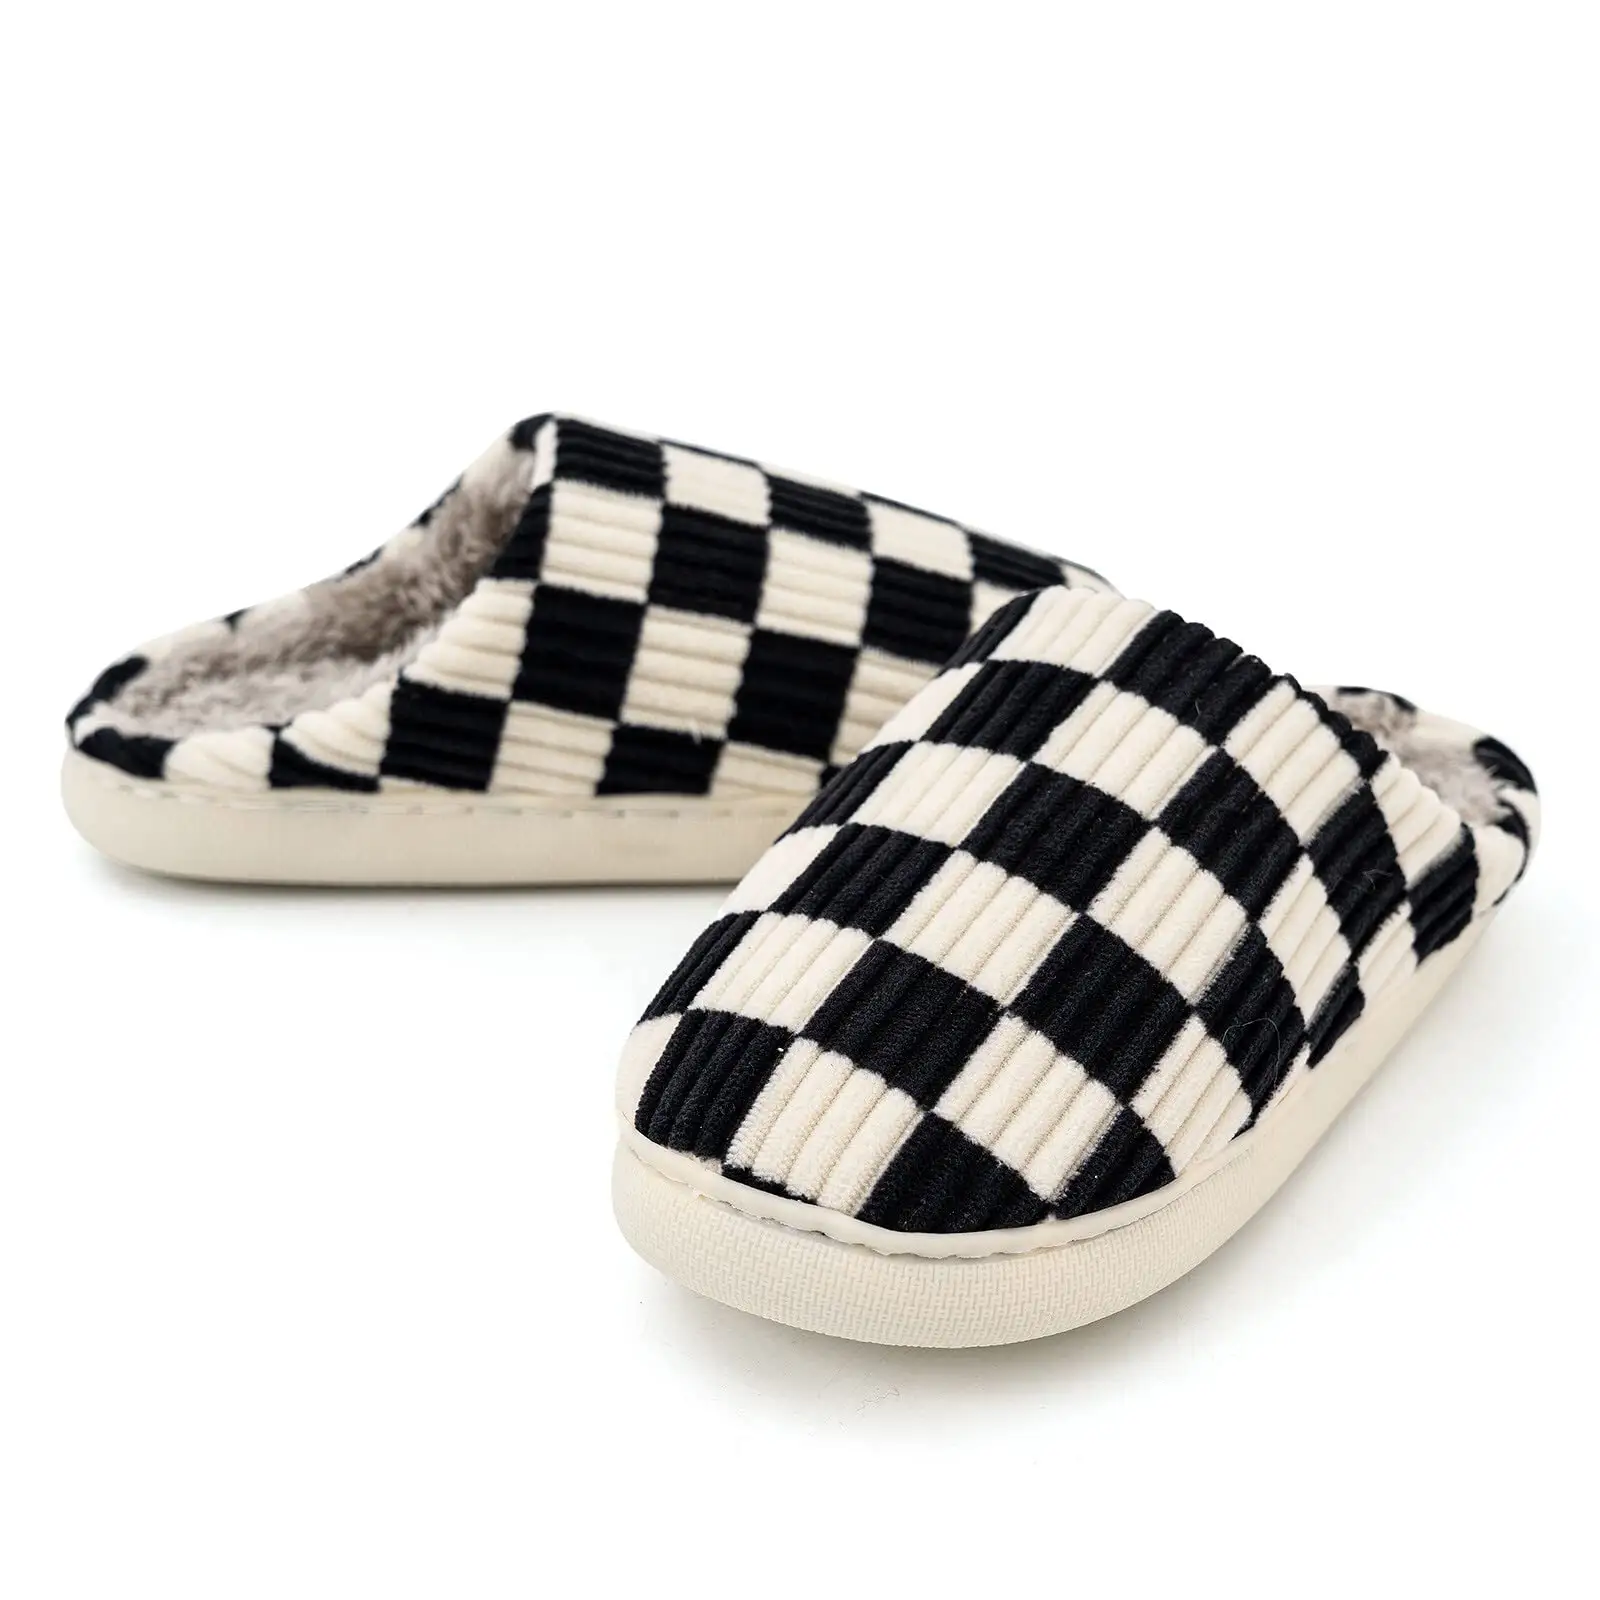 Nicecin Plaid Scuff Slides Women Cozy Memory Foam Slip on Warm Checkered Shoes Indoor Outdoor with Non-slip Mens House Shoes